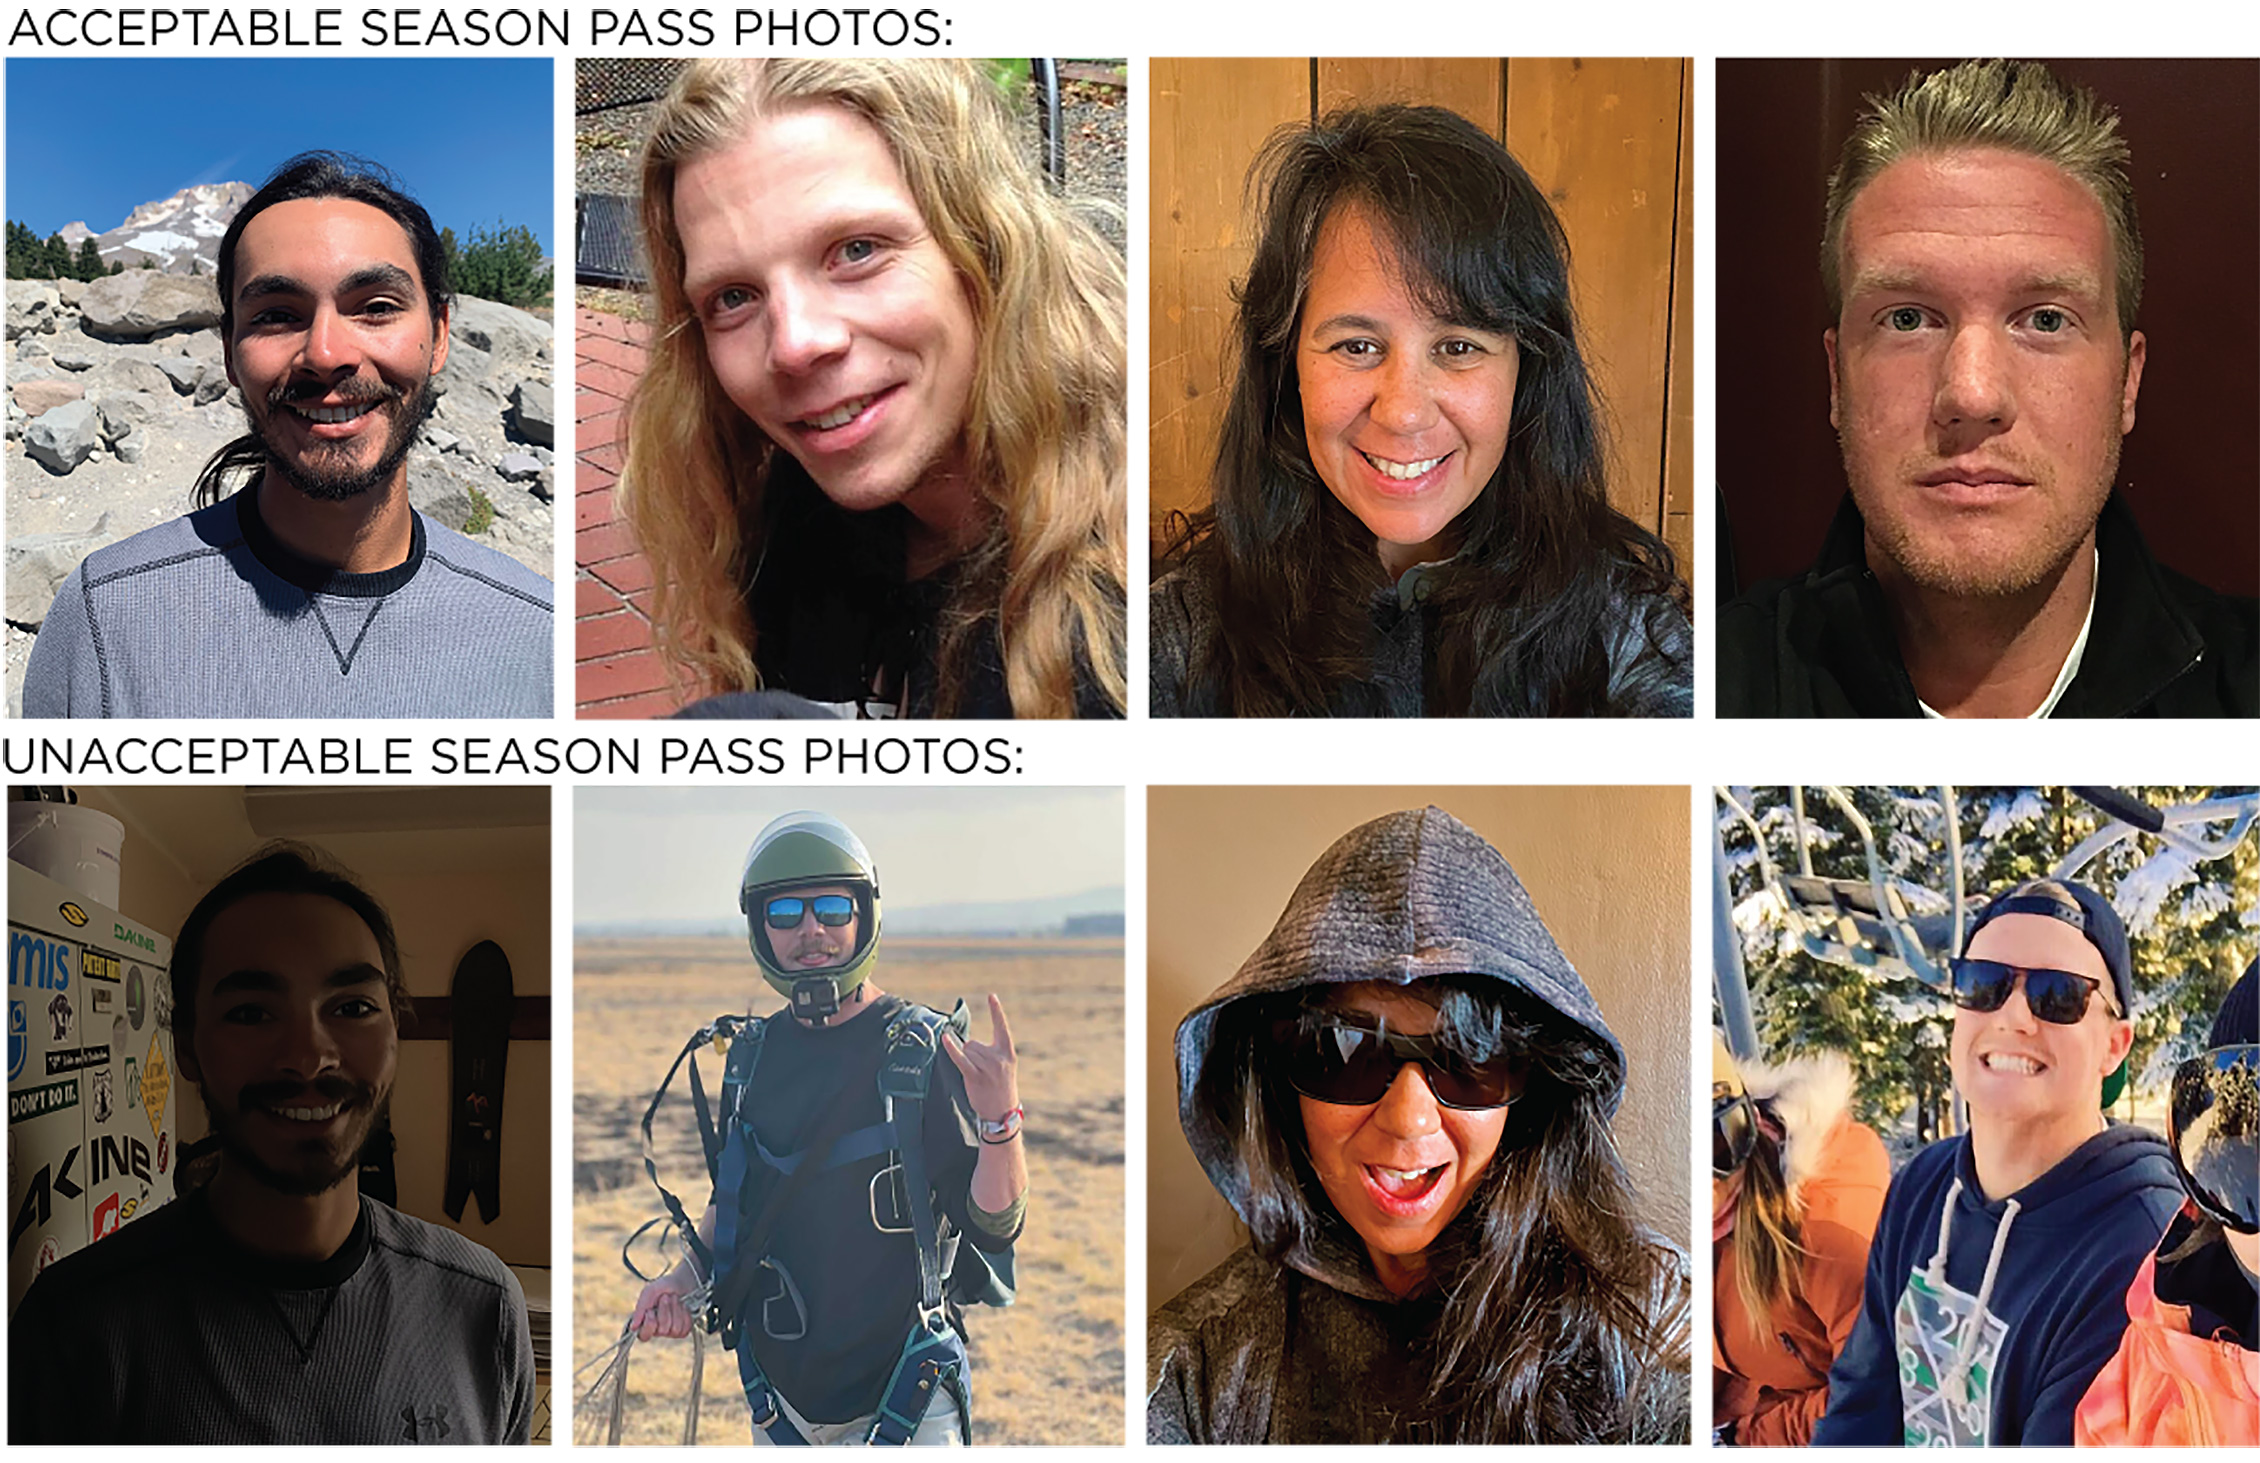 EXAMPLES OF ACCEPTABLE AND UNACCEPTABLE SEASON PASS PHOTO UPLOADS